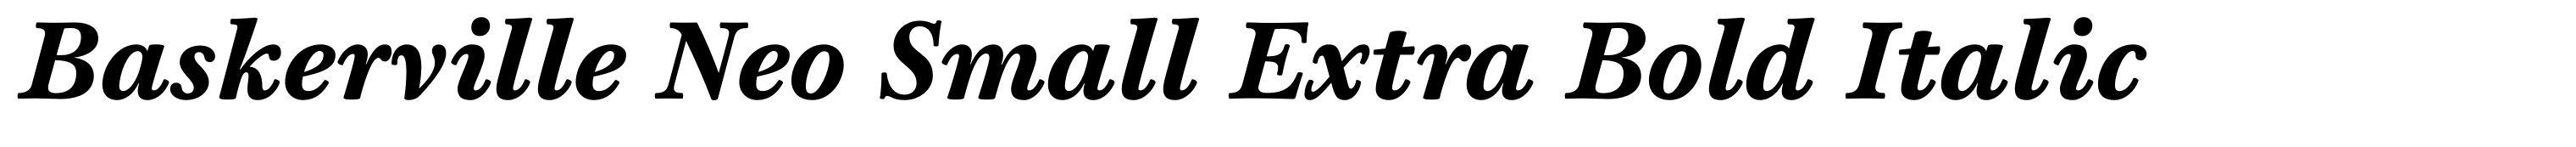 Baskerville Neo Small Extra Bold Italic